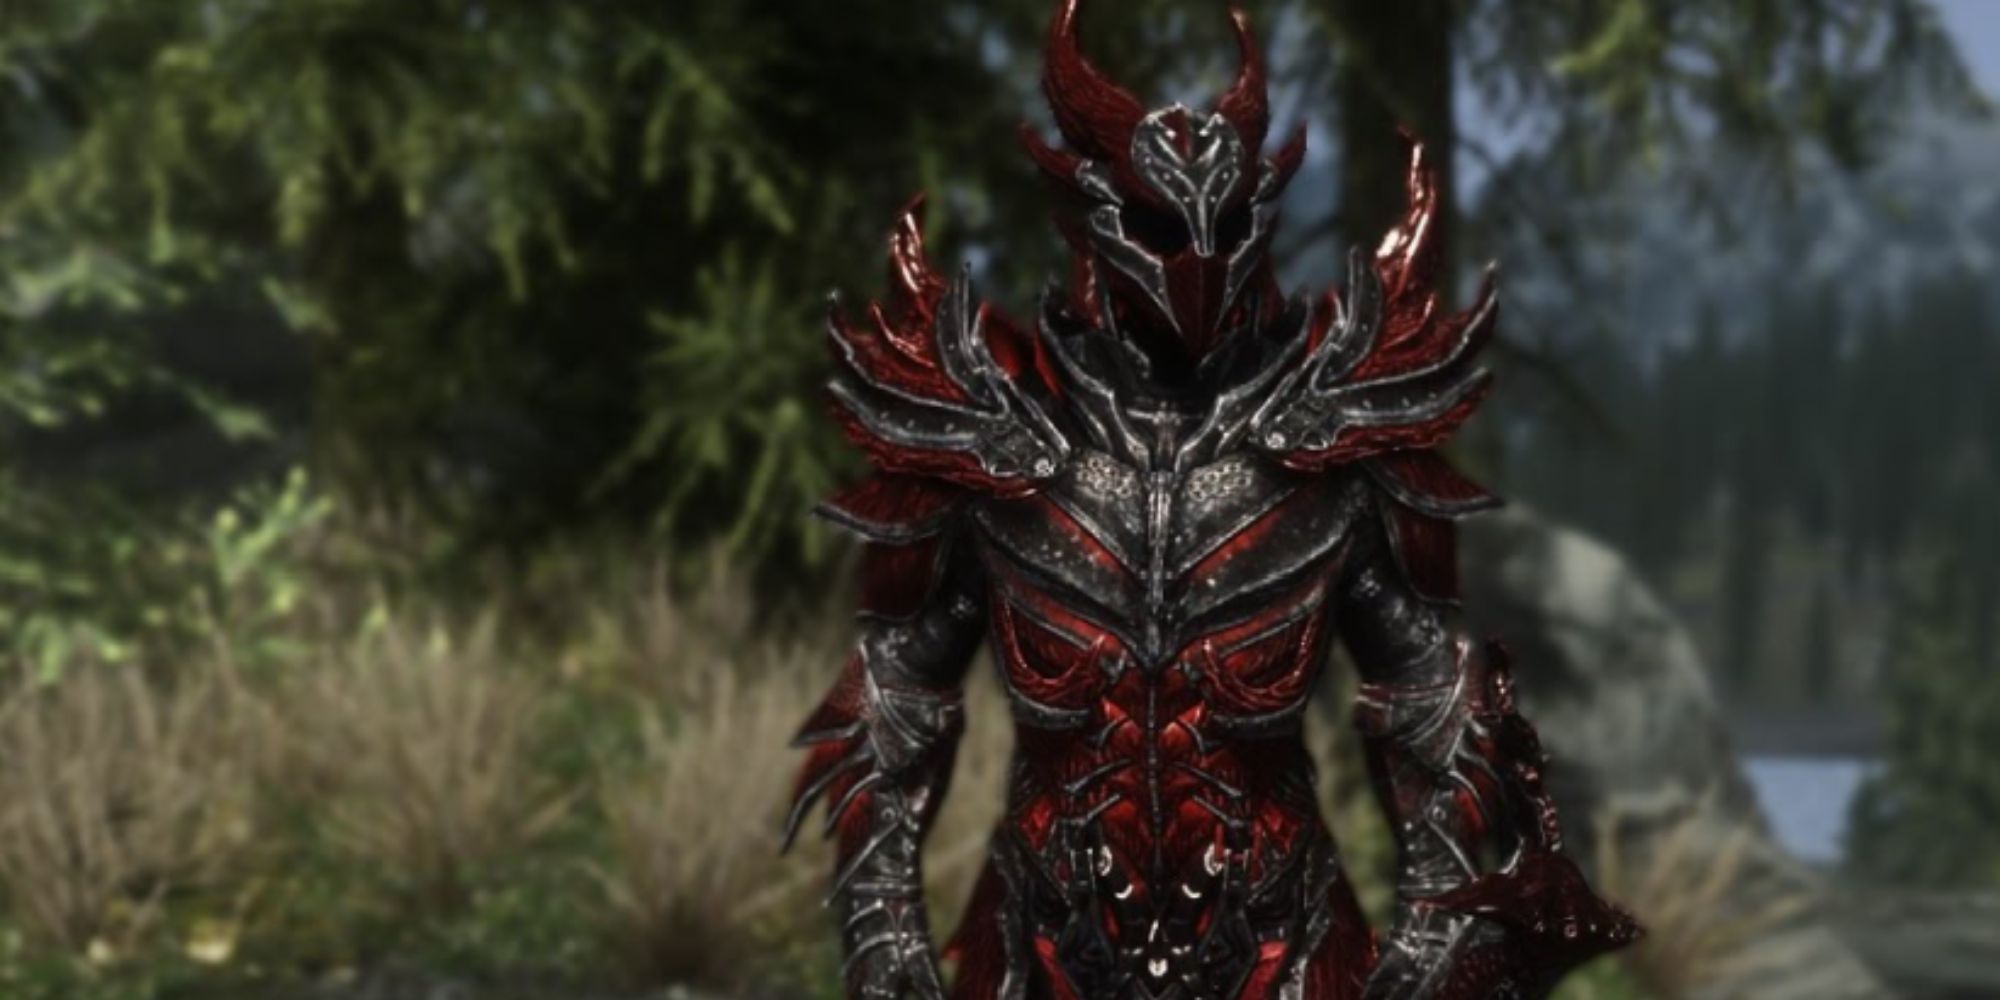 skyrim_character_wearing_daedric_armor_in_front_of_tree